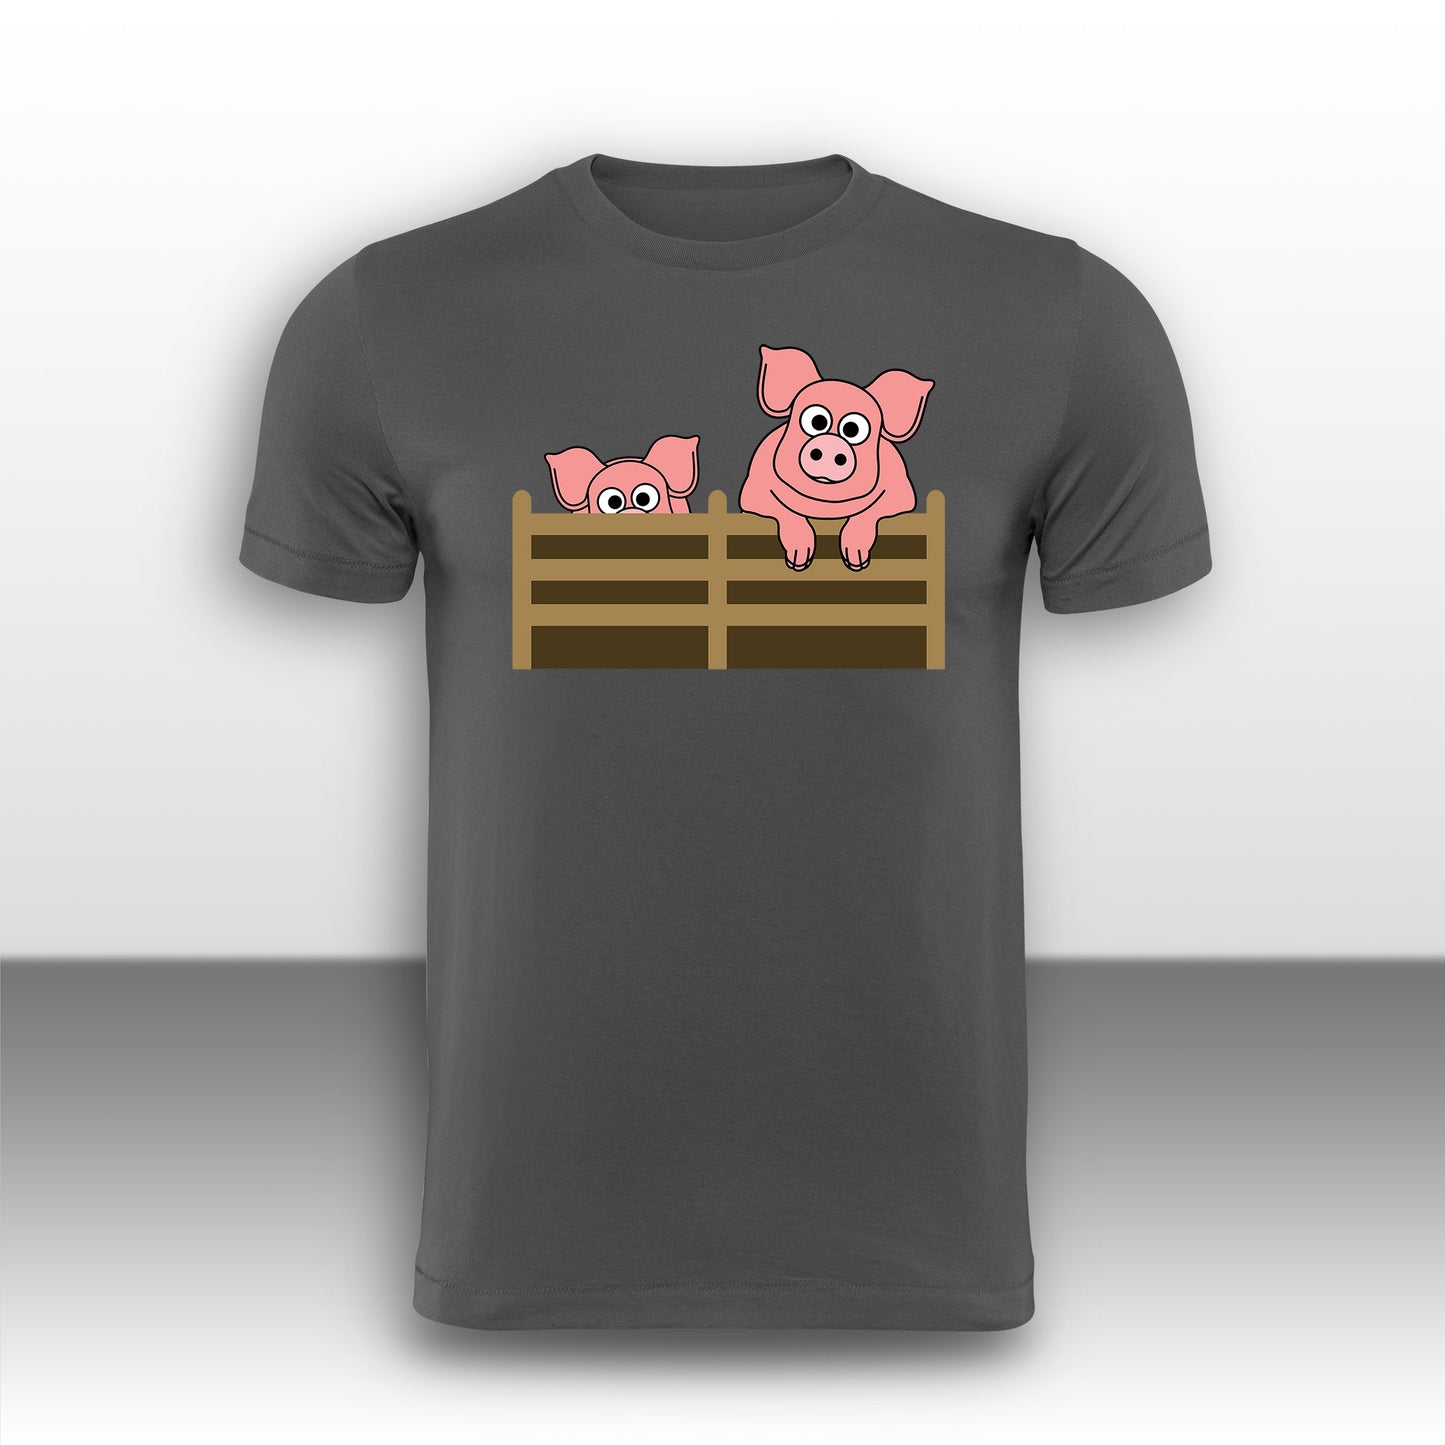 Happy Pigs Adult T-Shirt from the Farm Yard Collection